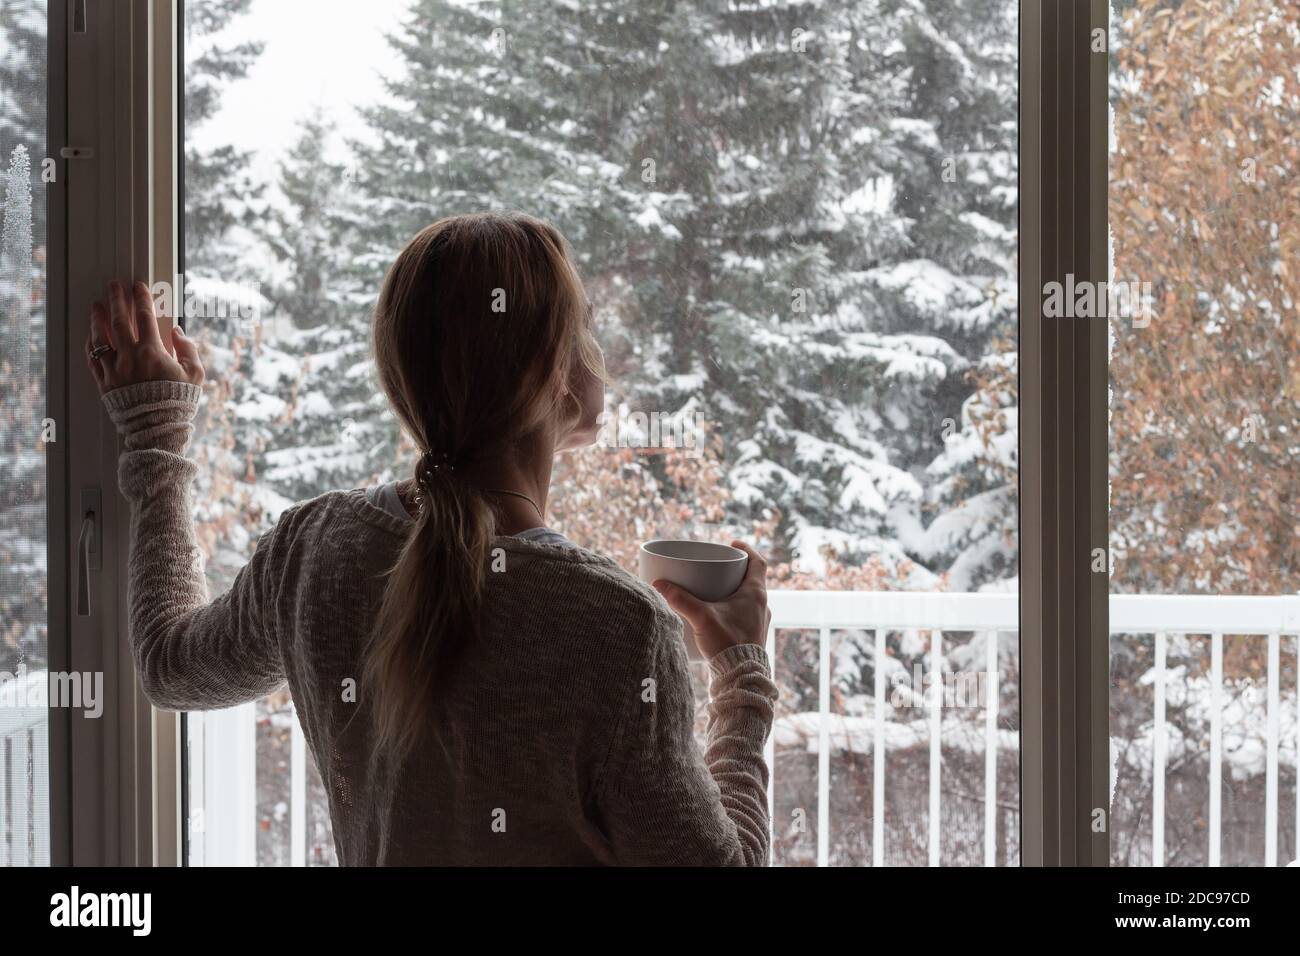 Woman looking out window at winter view, snow covered trees, with coffee mug in hand Stock Photo